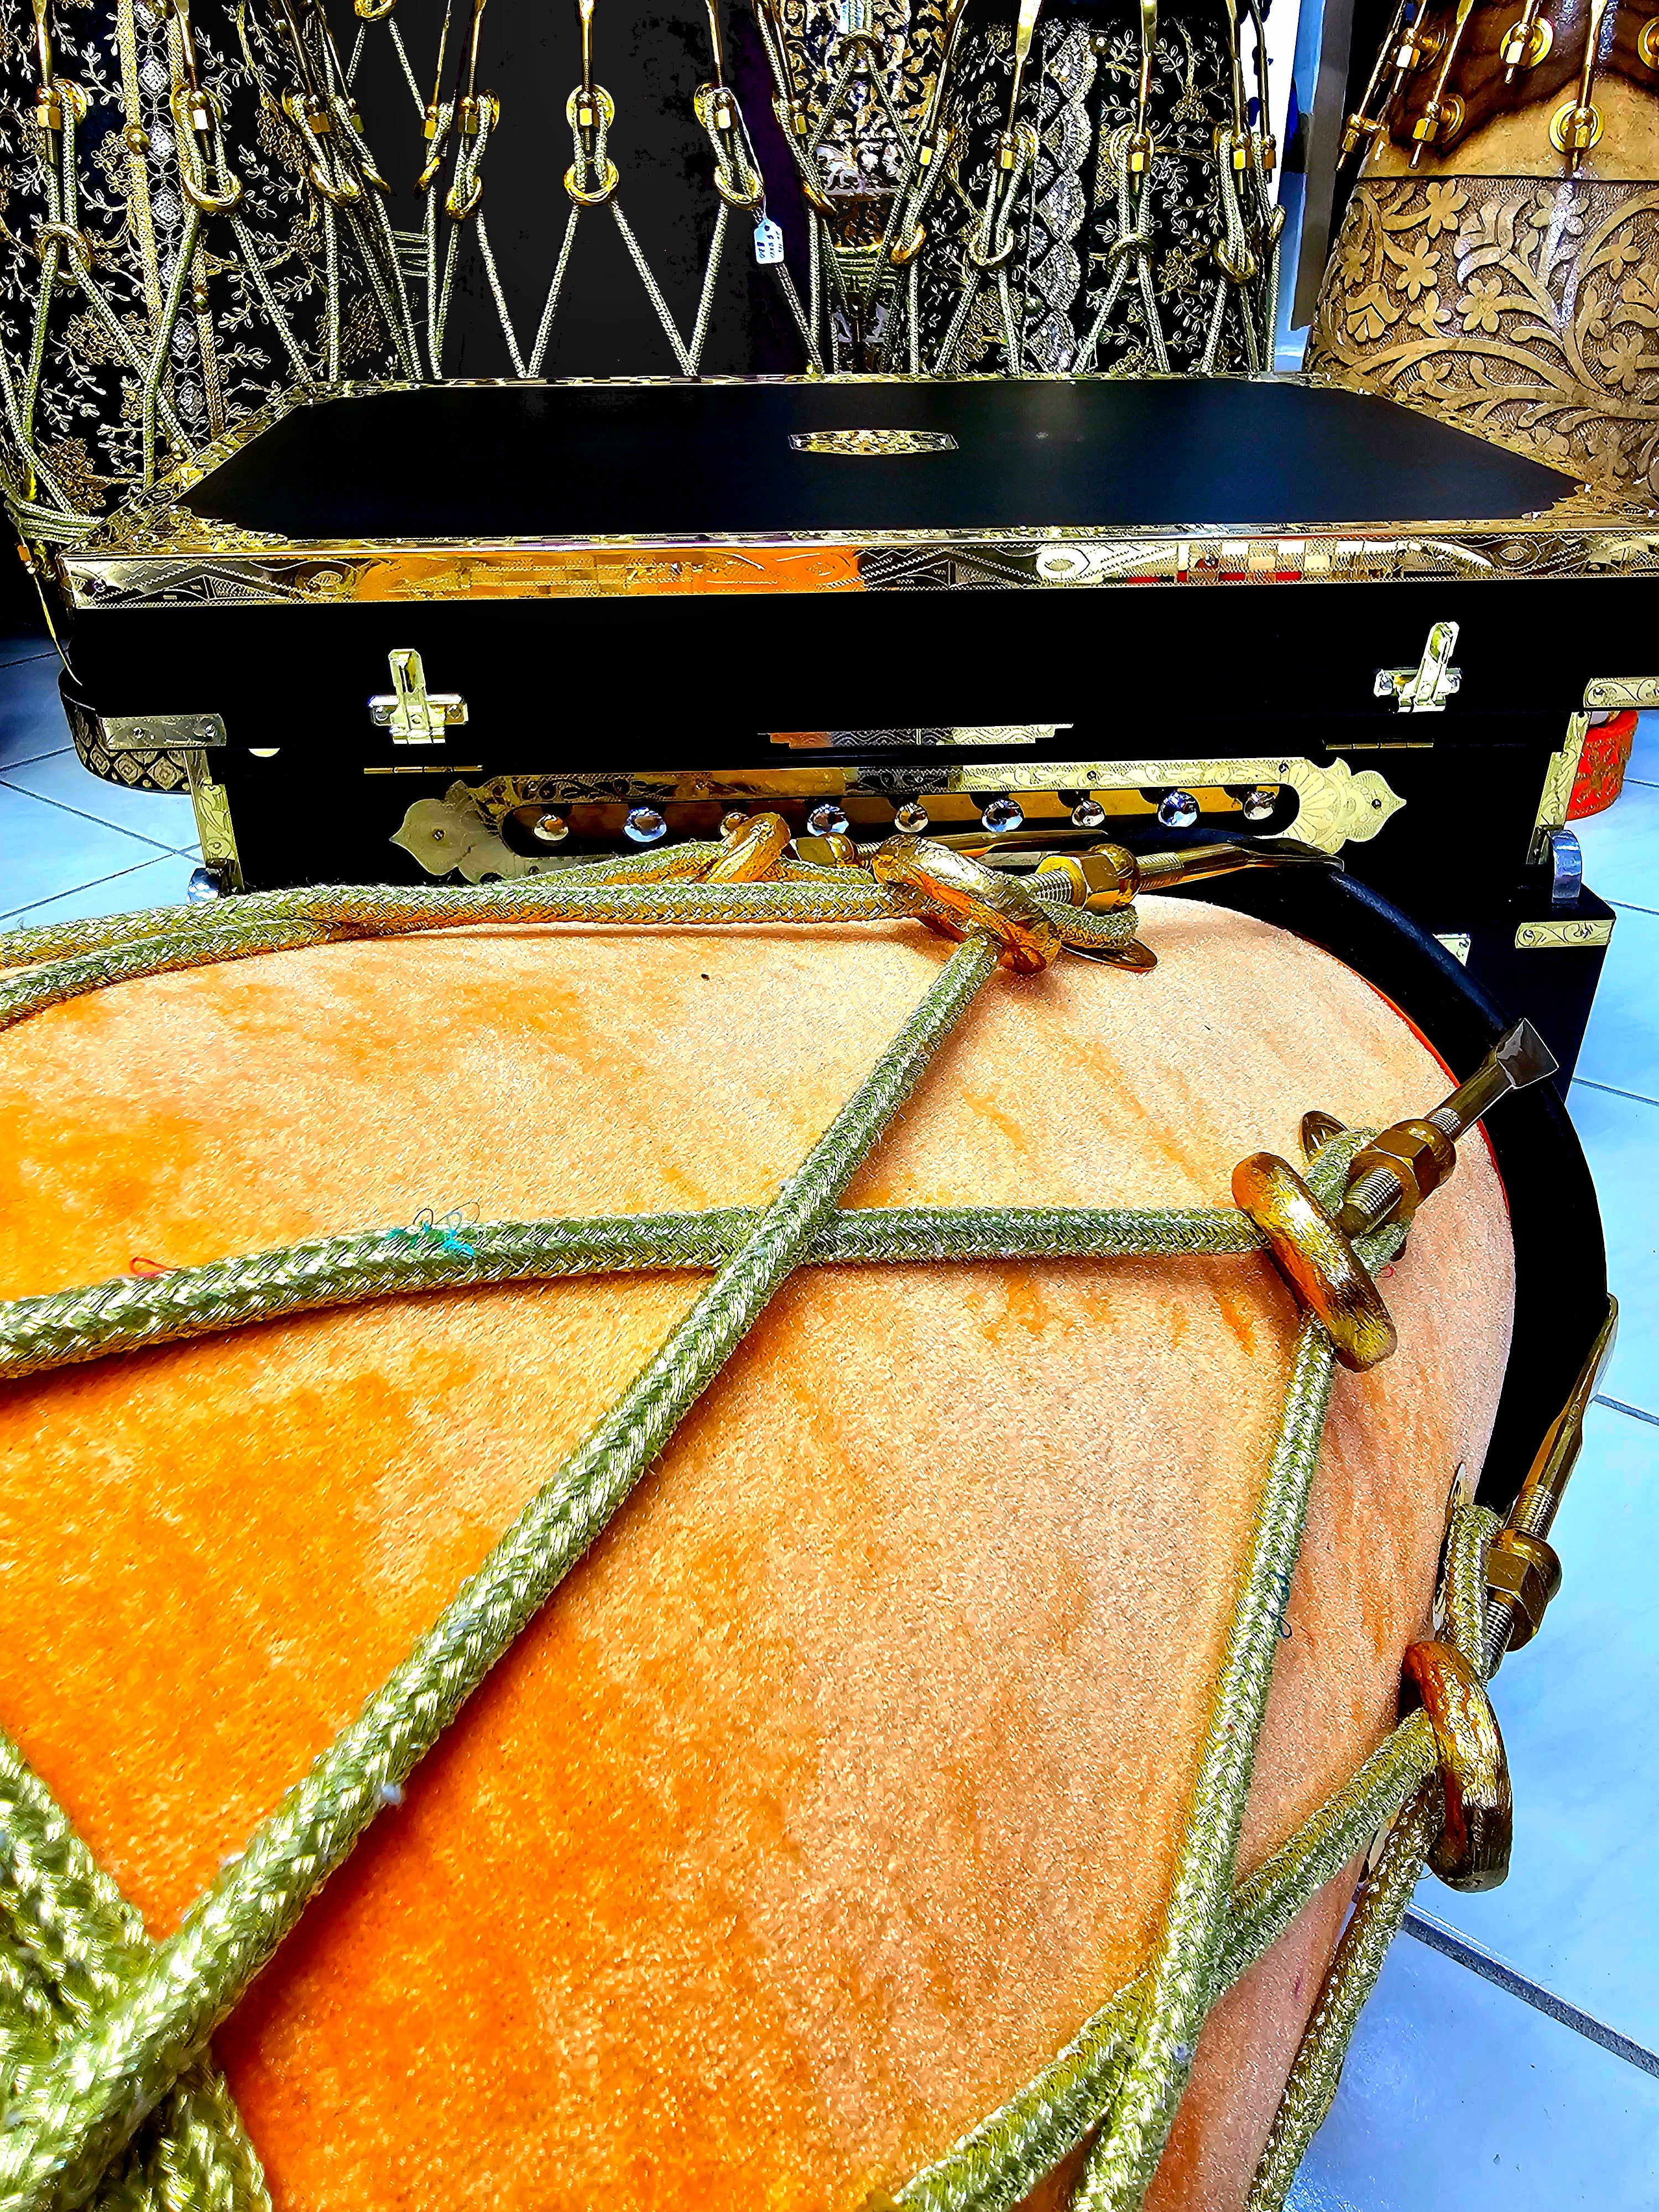 Peach Melody: Red Sheesham Dholak in Peach Velvet Wrap, Black Skins, Golden Brass Accents, and Intricate Rope Design